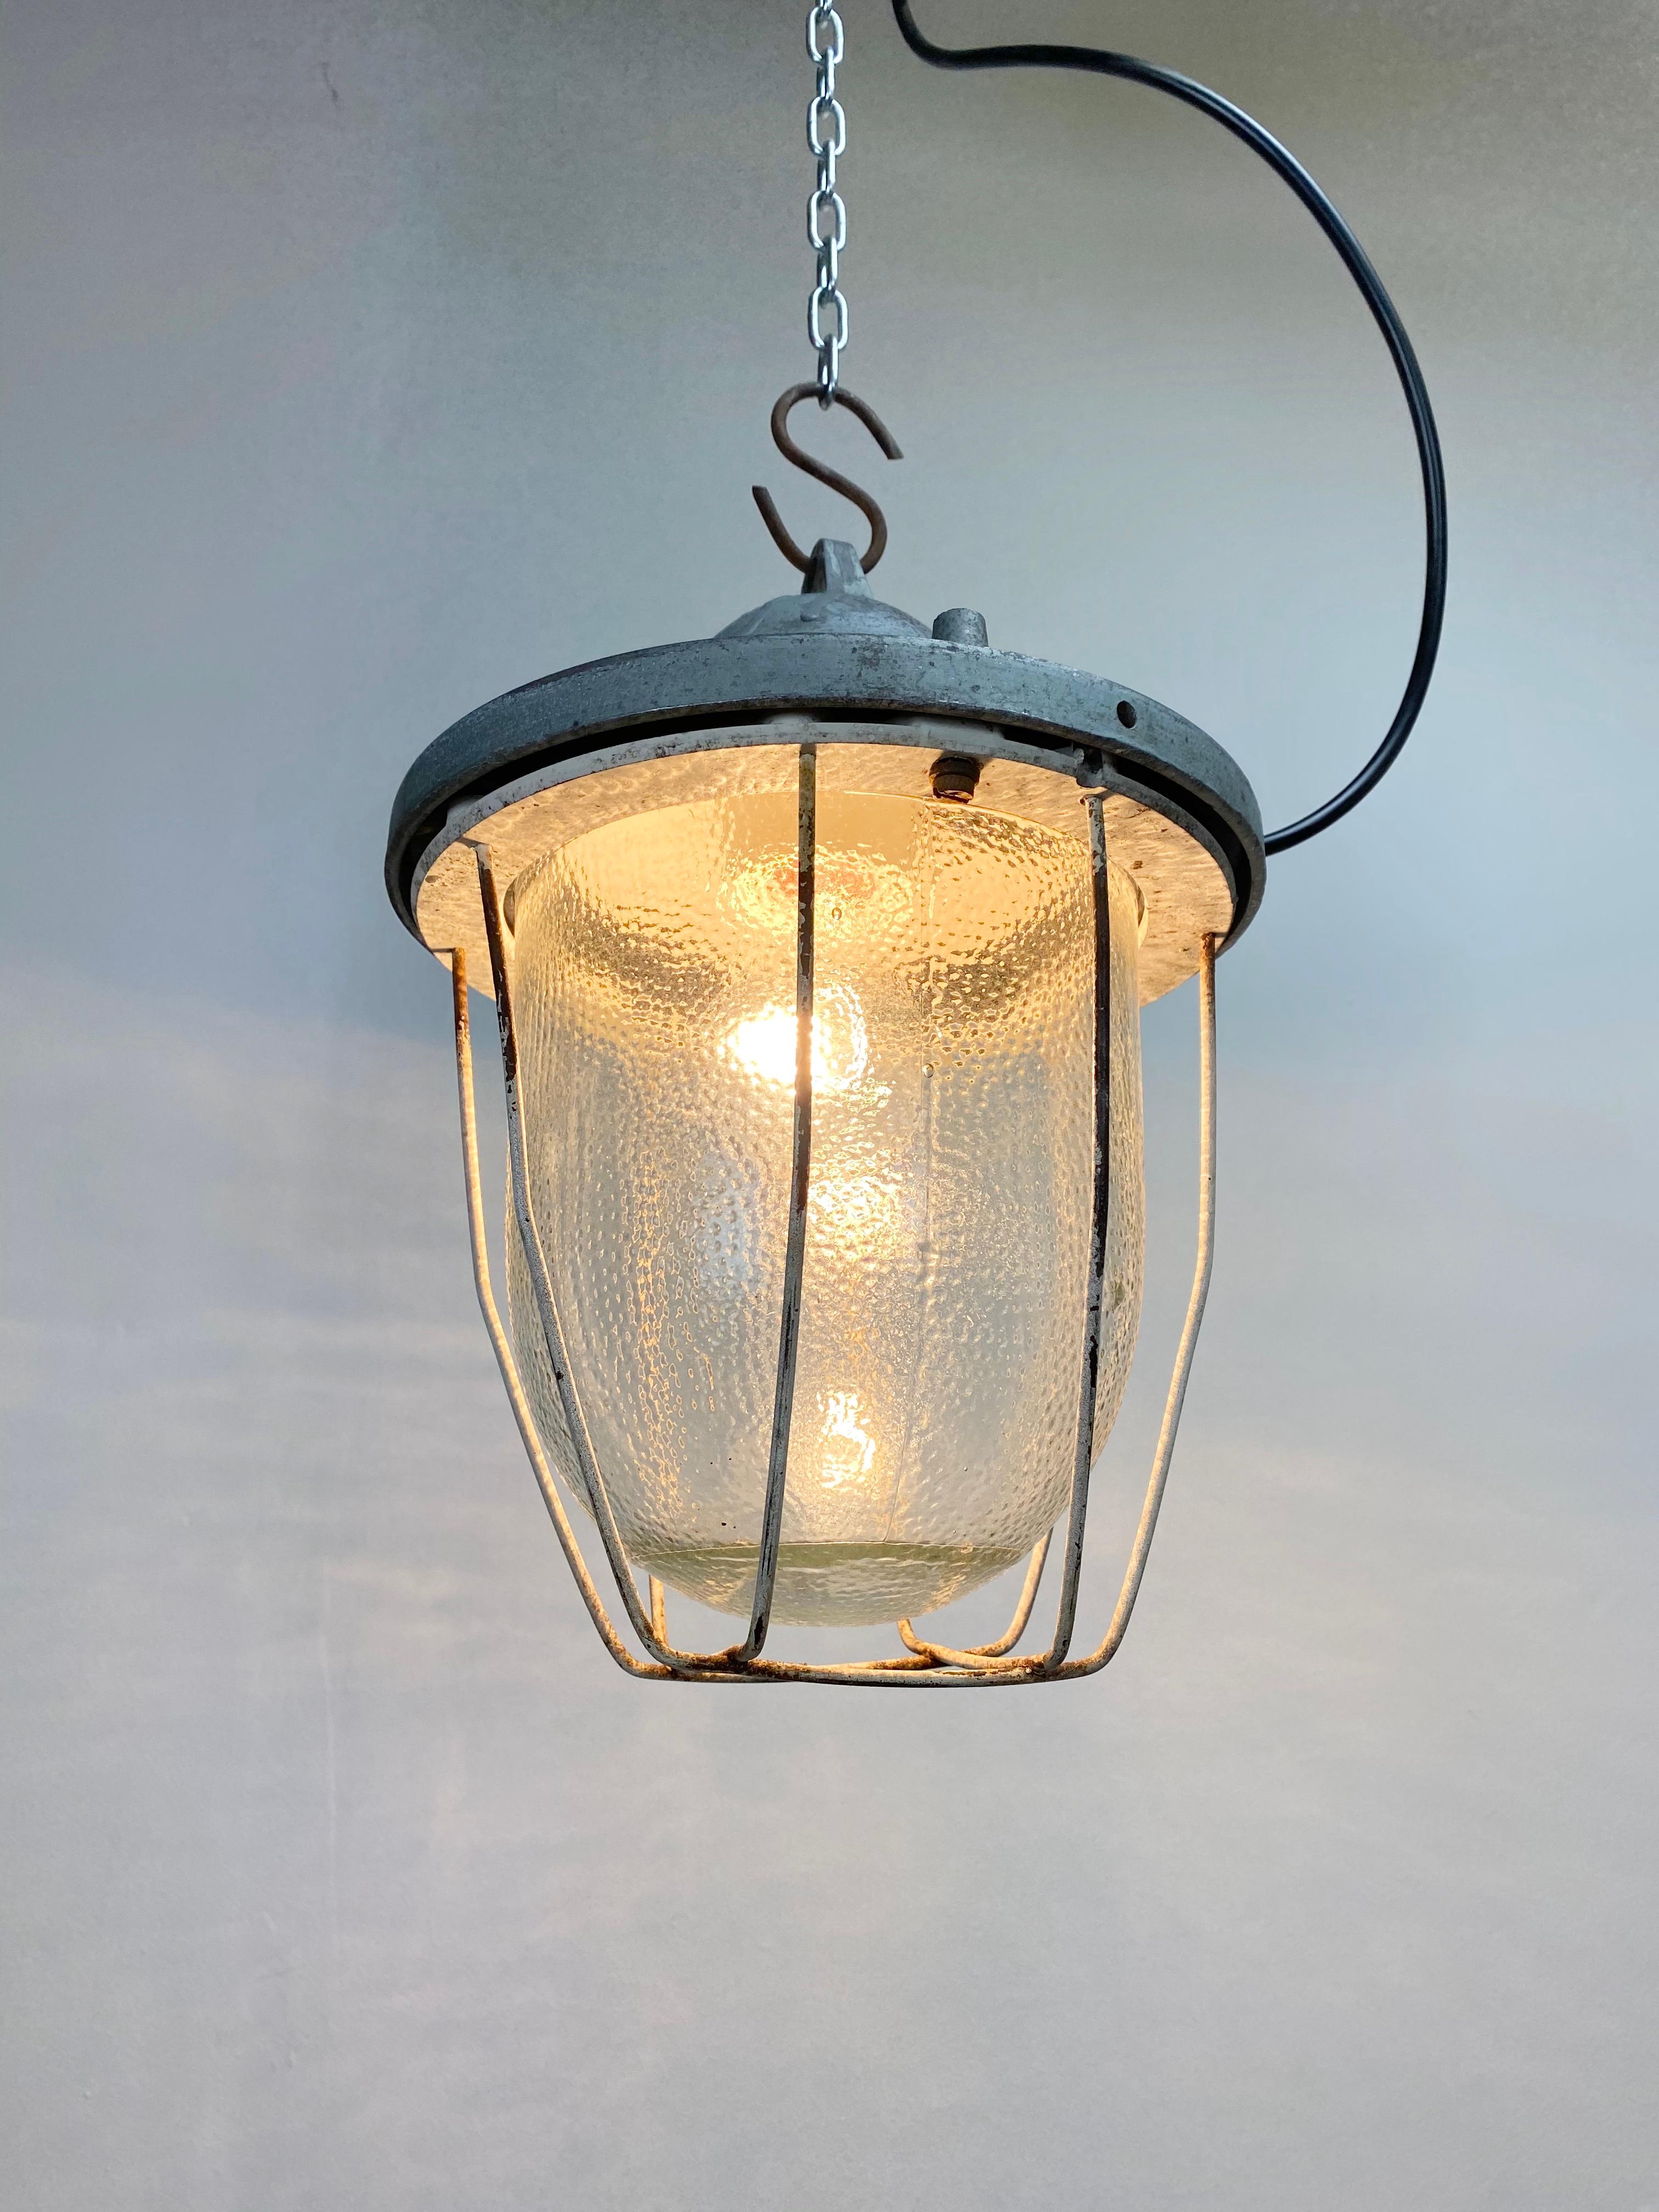 Mid-20th Century Industrial Bunker Lamp from Polam Gdansk, 1960s